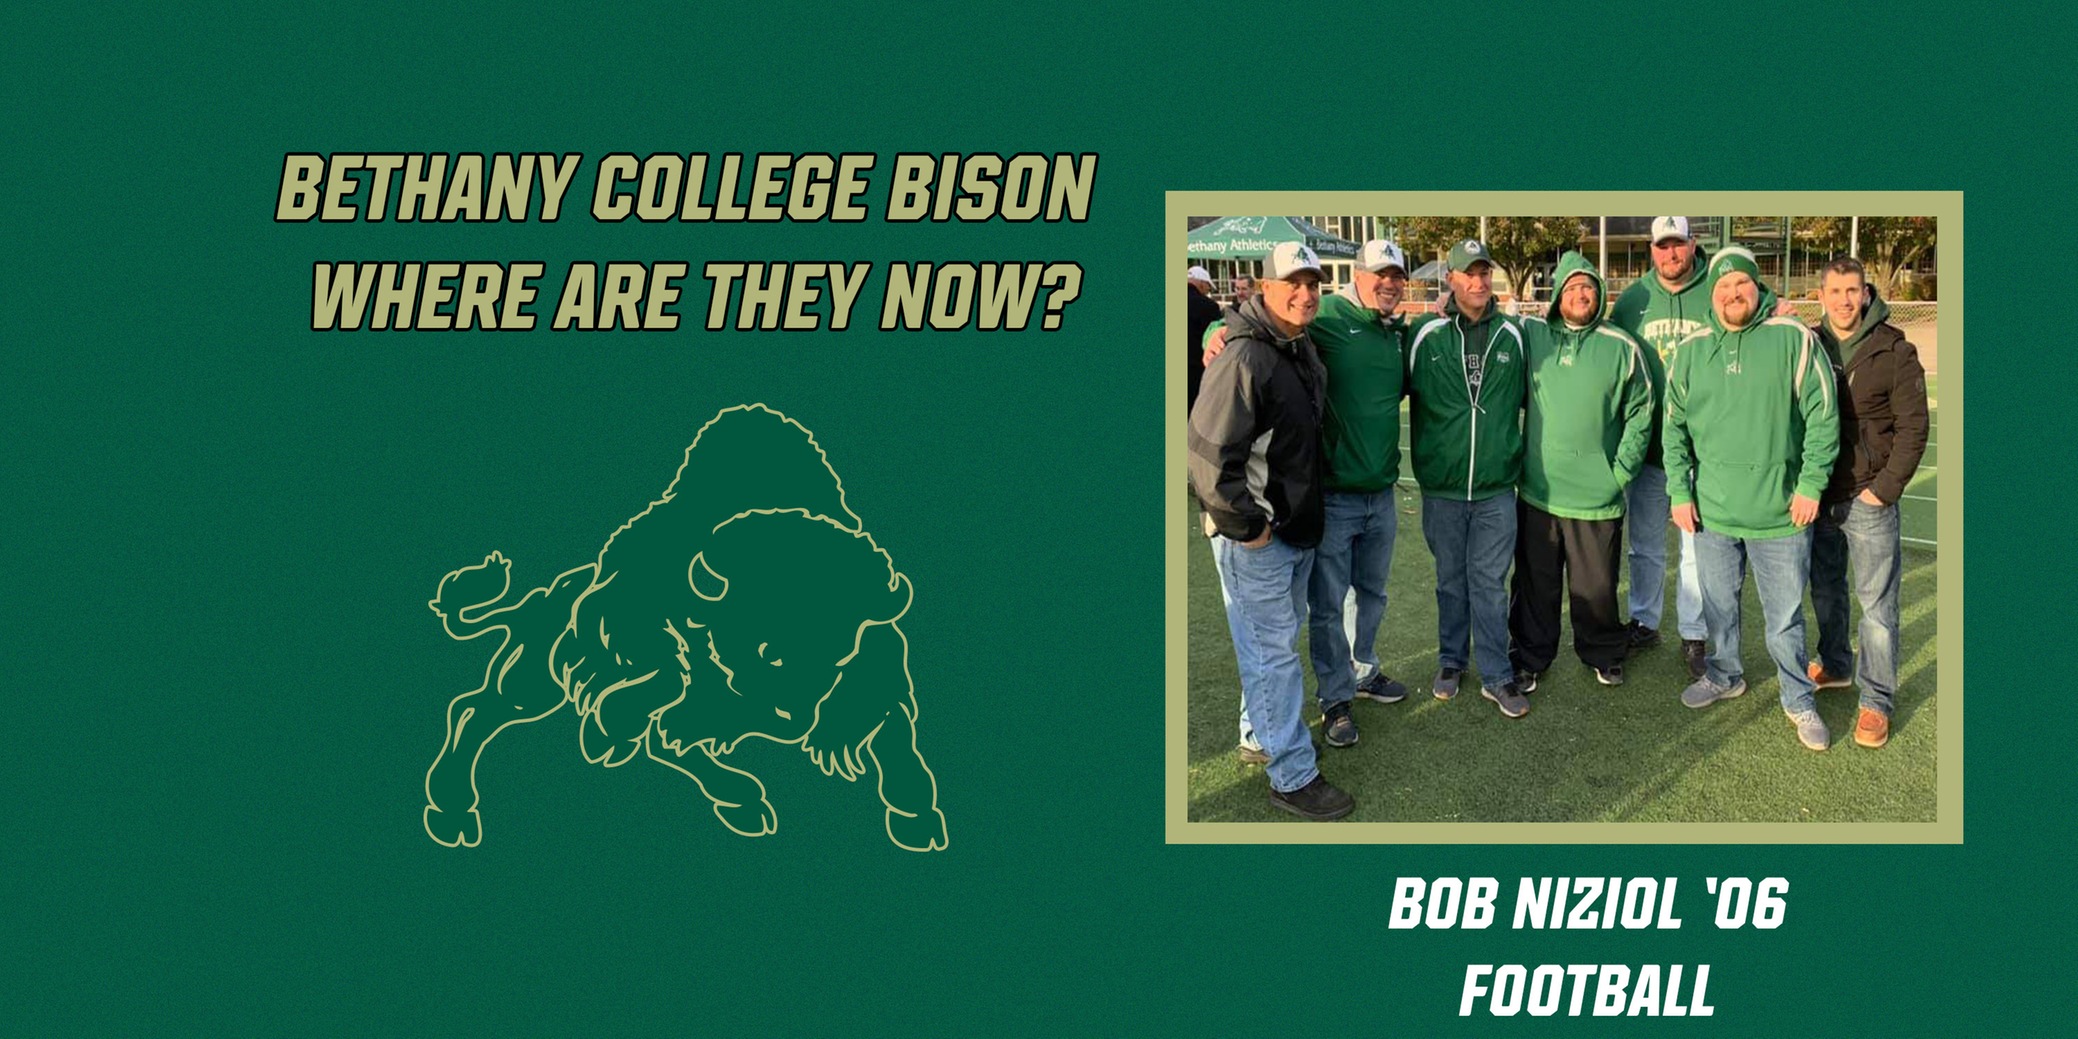 Where Are They Now Series - Bob Niziol '06, Football